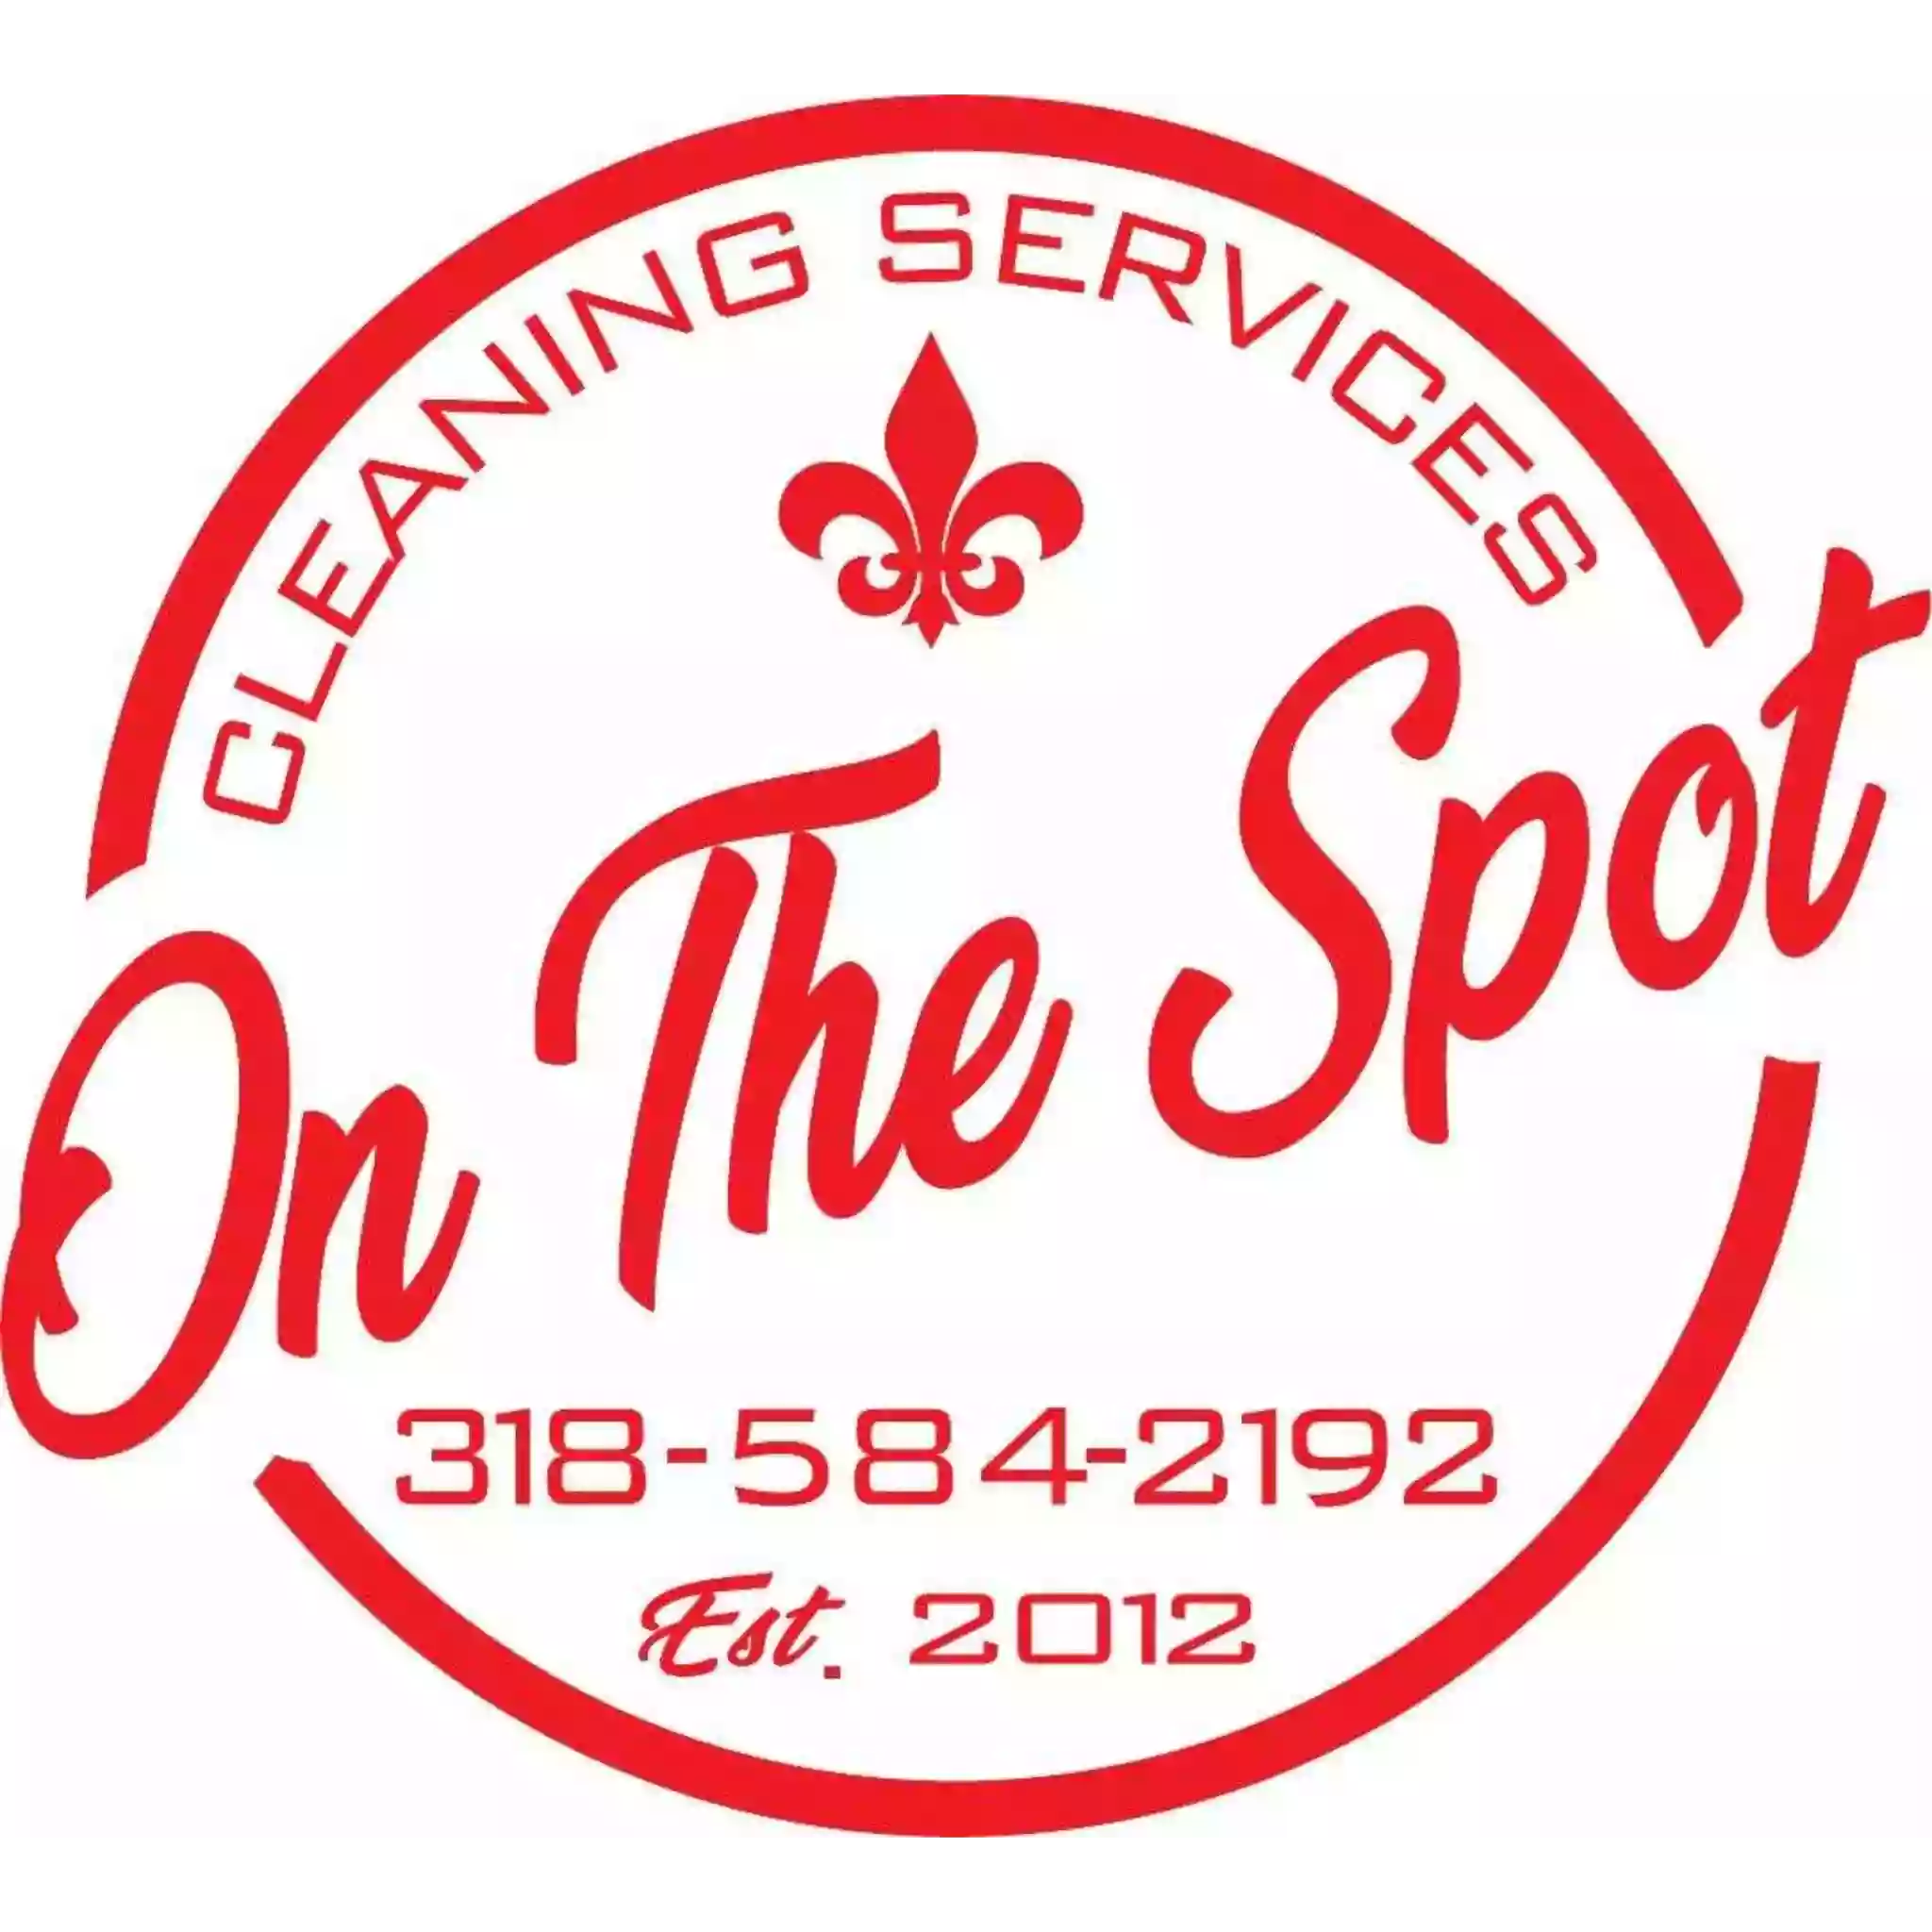 On The Spot Cleaning Services LLC